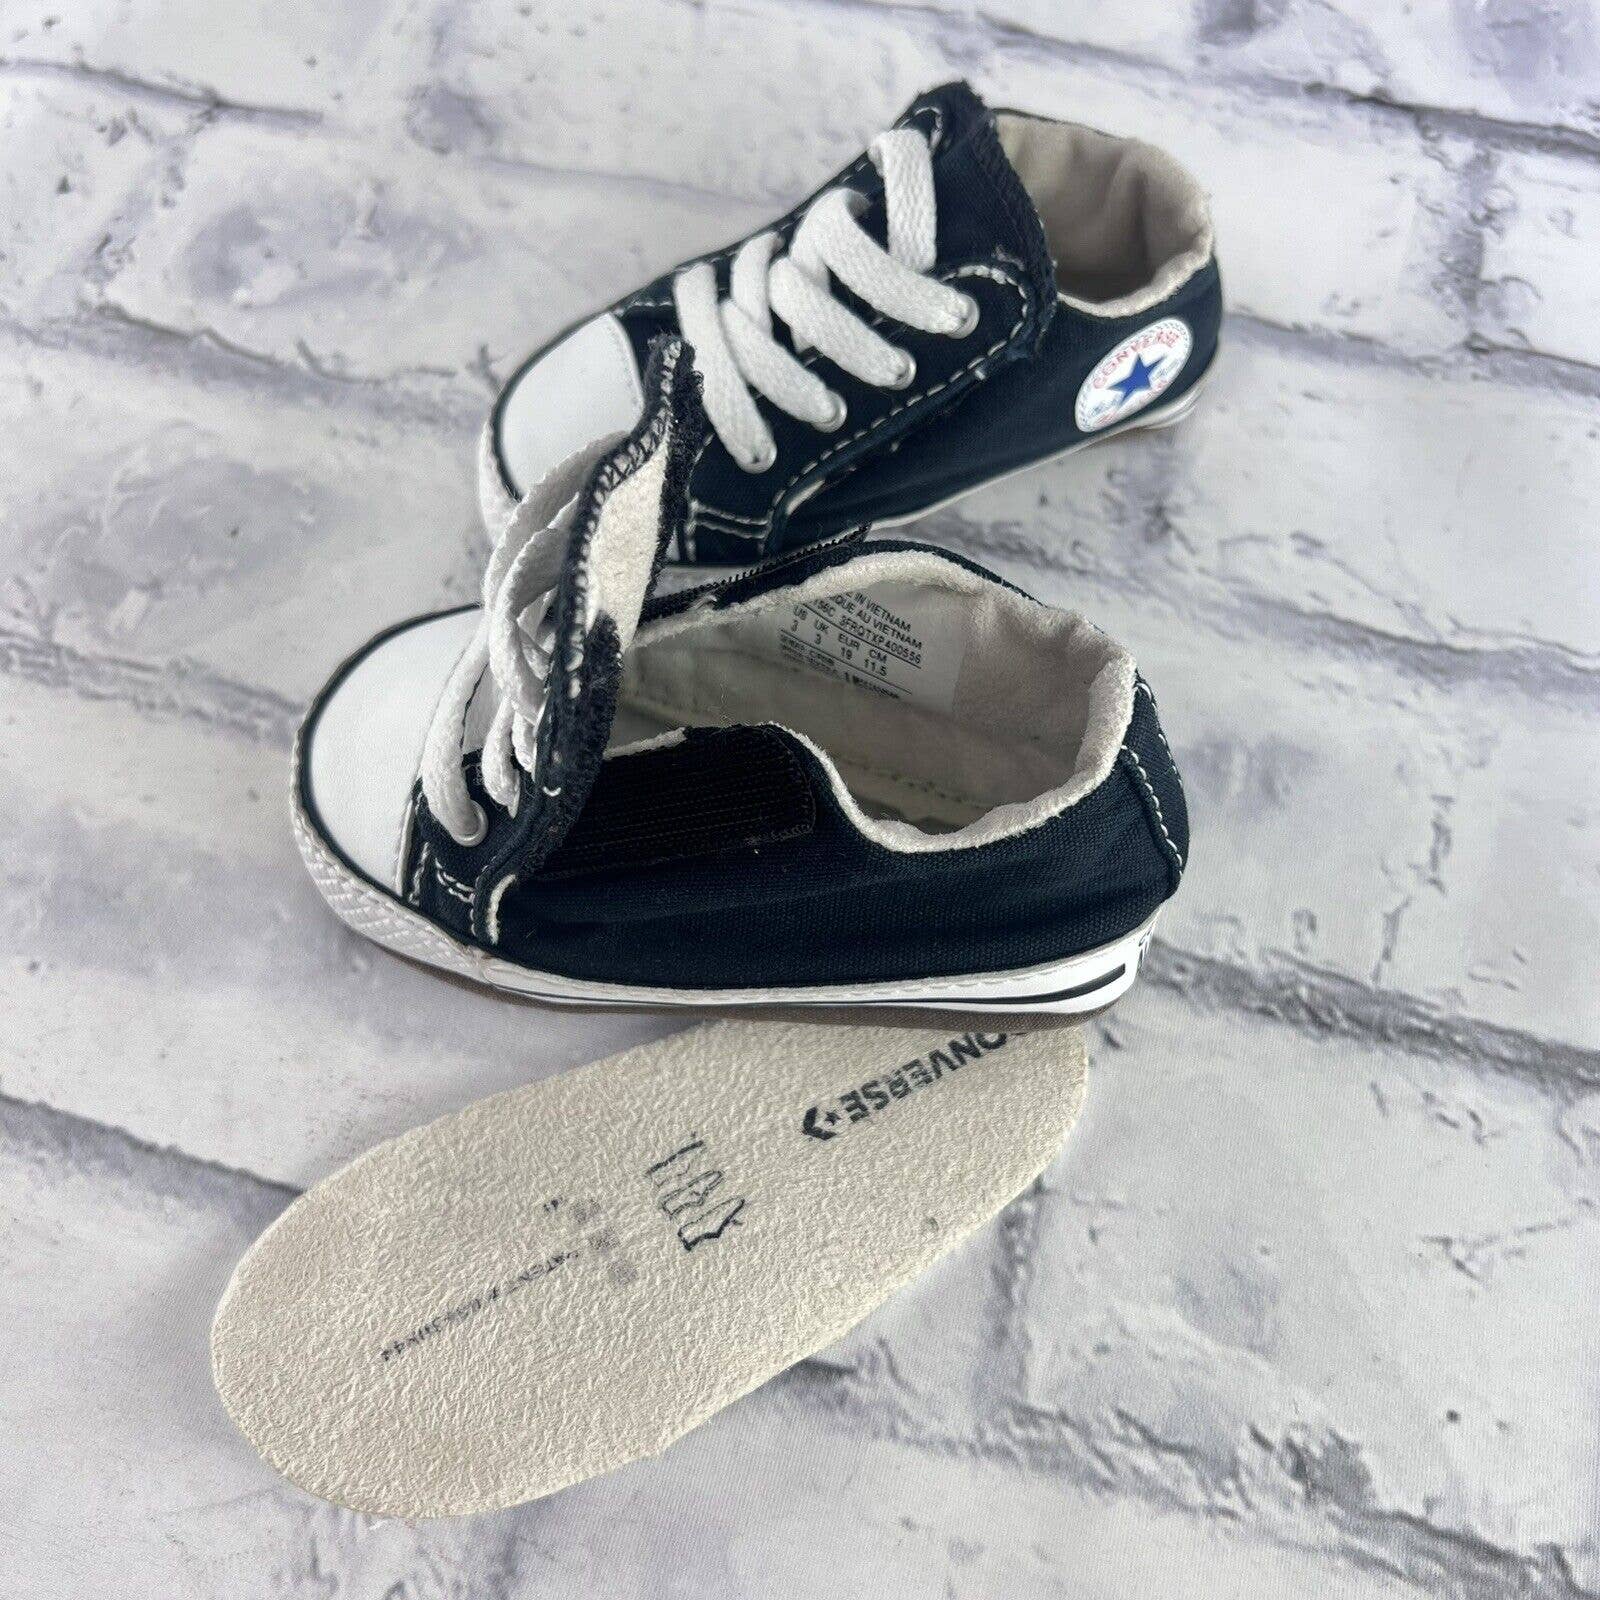 Converse Chuck Taylors All Star Black Cribster Infant Baby Size 3 Black & White